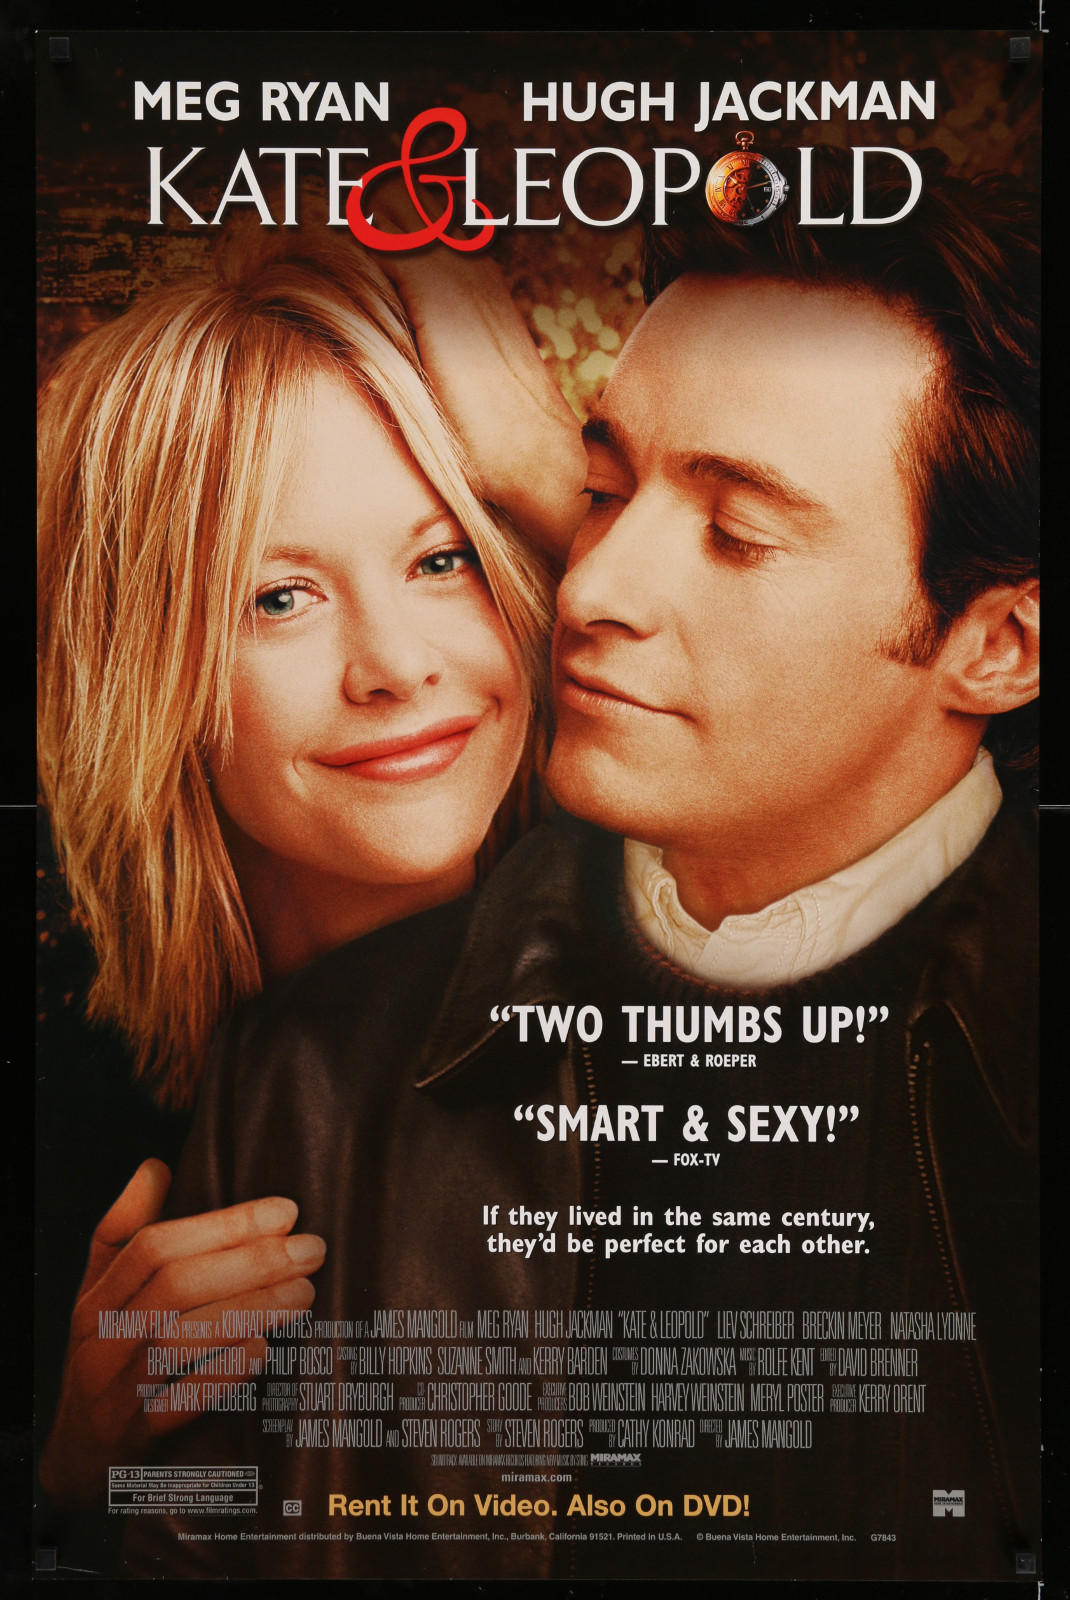 Kate & Leopold 2A327 A Part Of A Lot 10 Unfolded Video And Special Posters '80S-00S Many Great Movie Images!